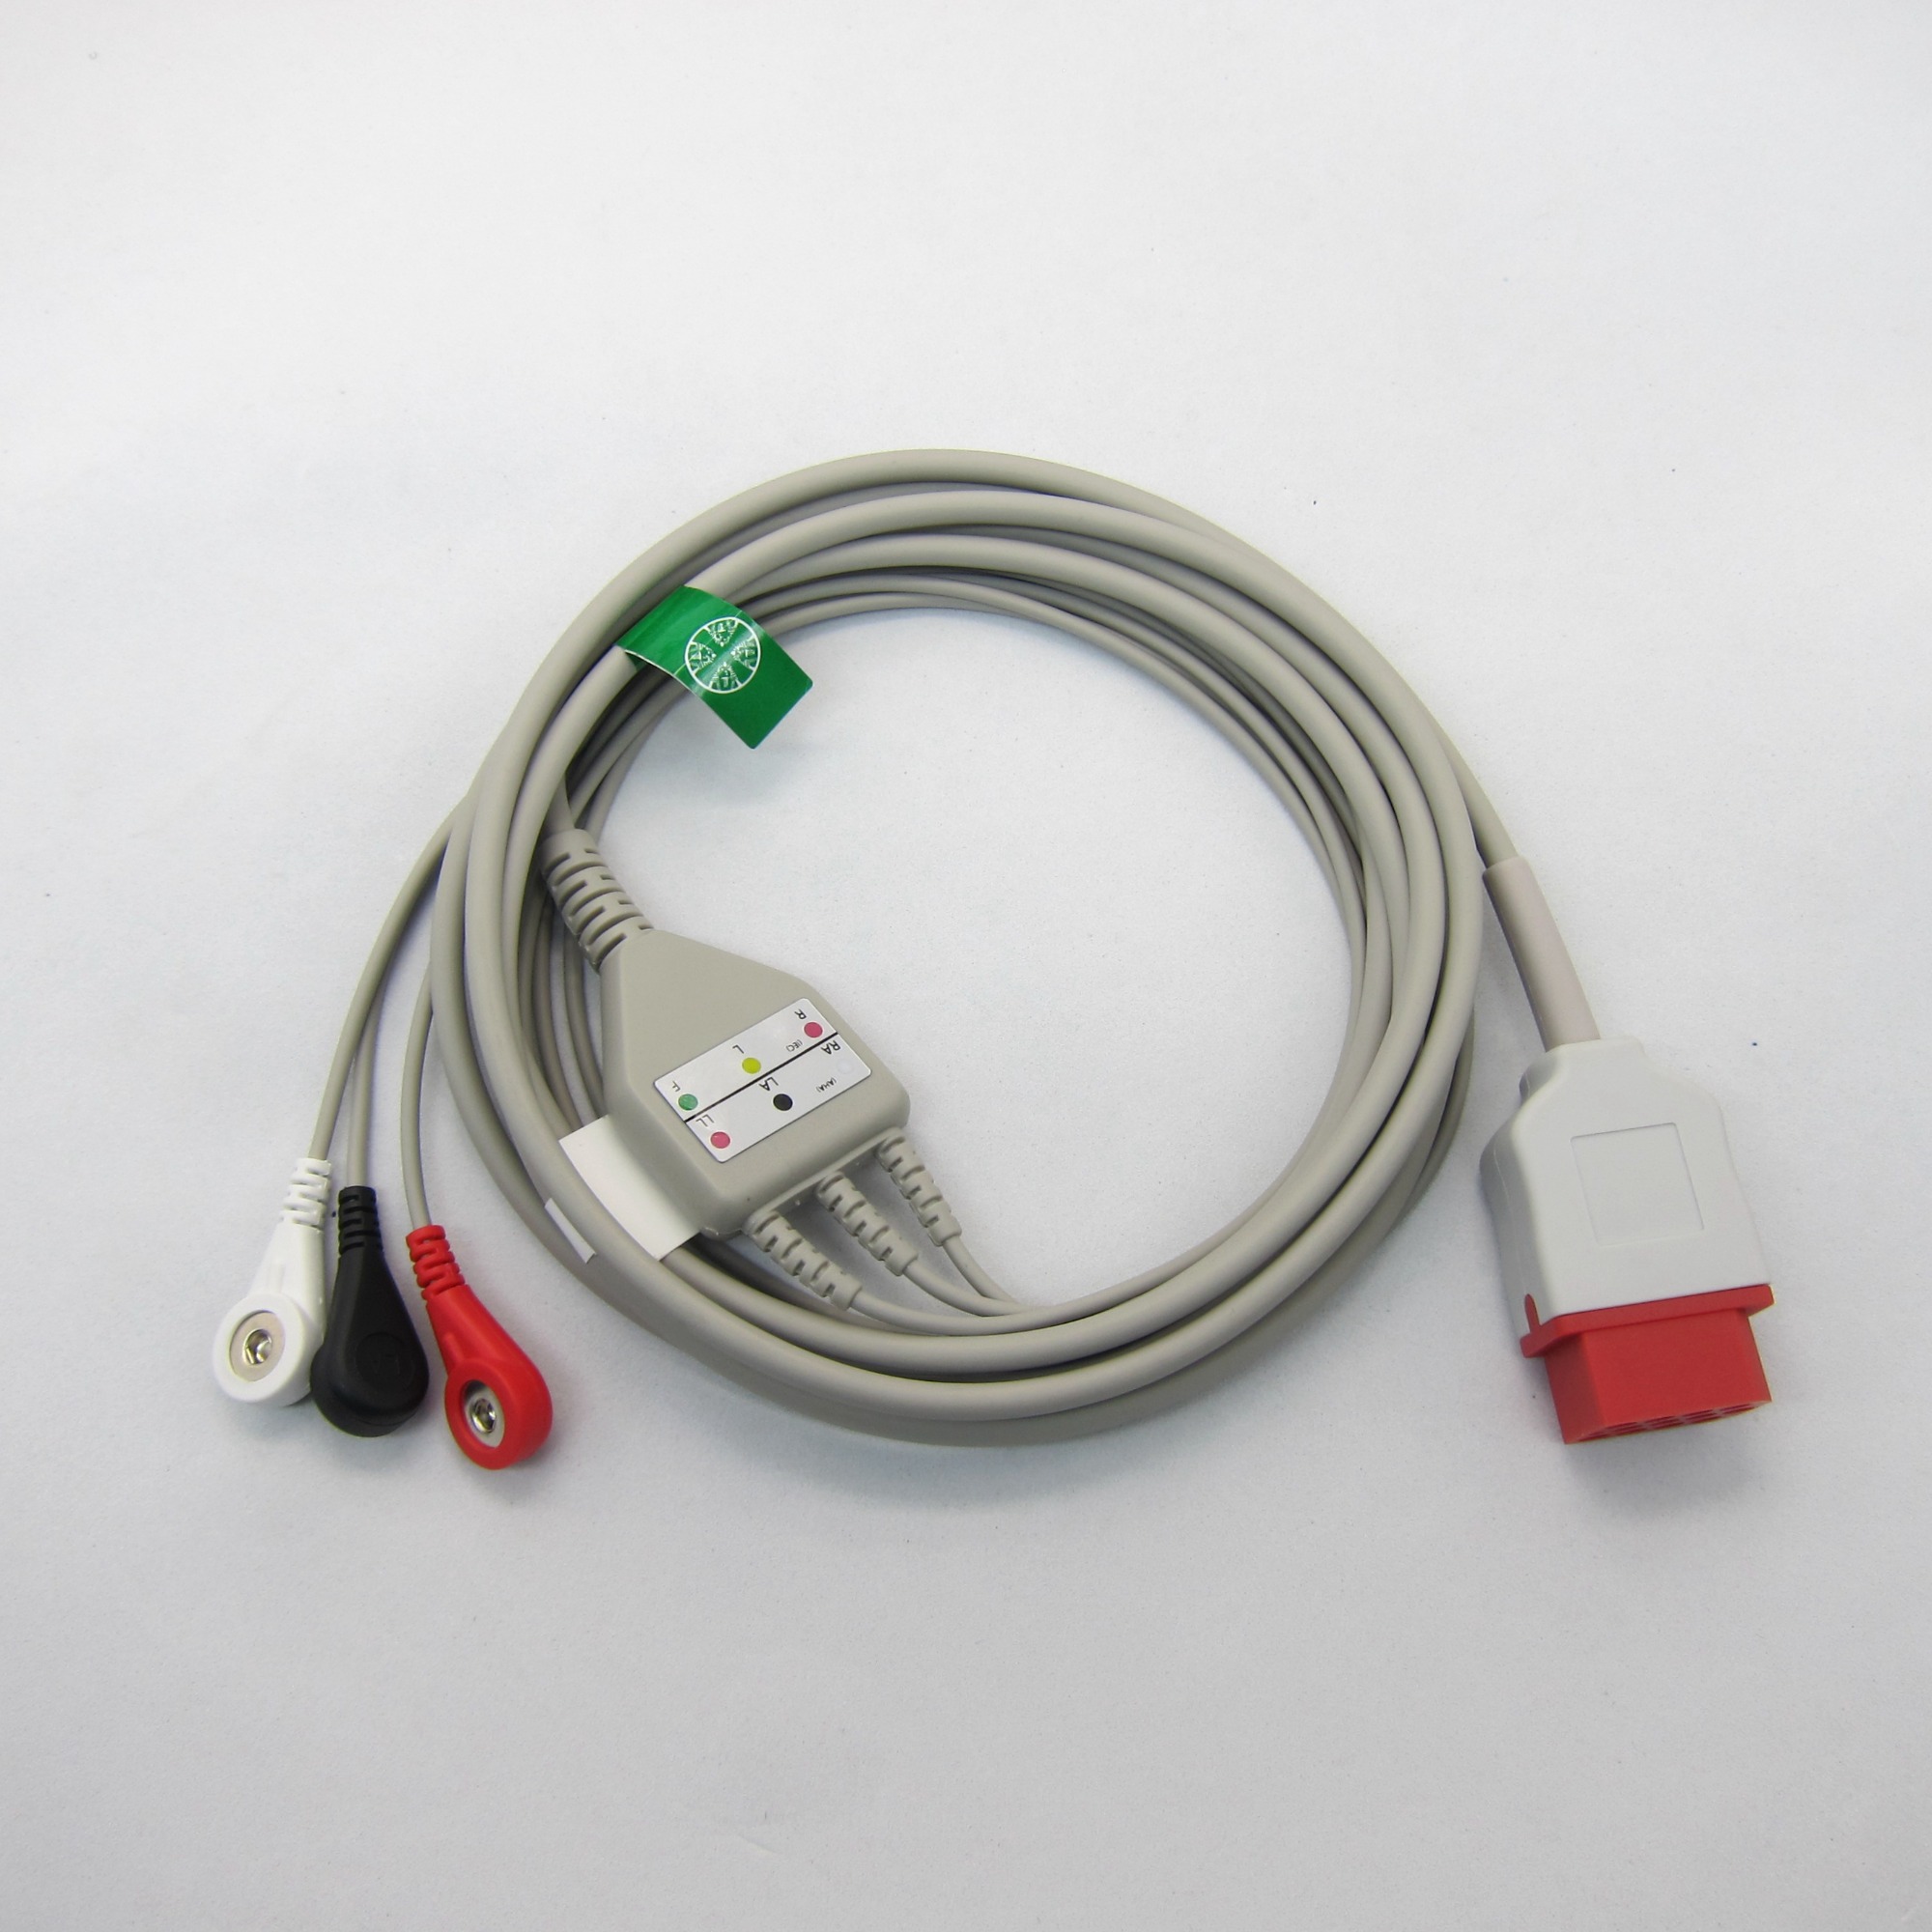 Wholesales One-piece 3 or 5 Leads Snap Or Clip ECG cable and leadwires for Biomet BM7